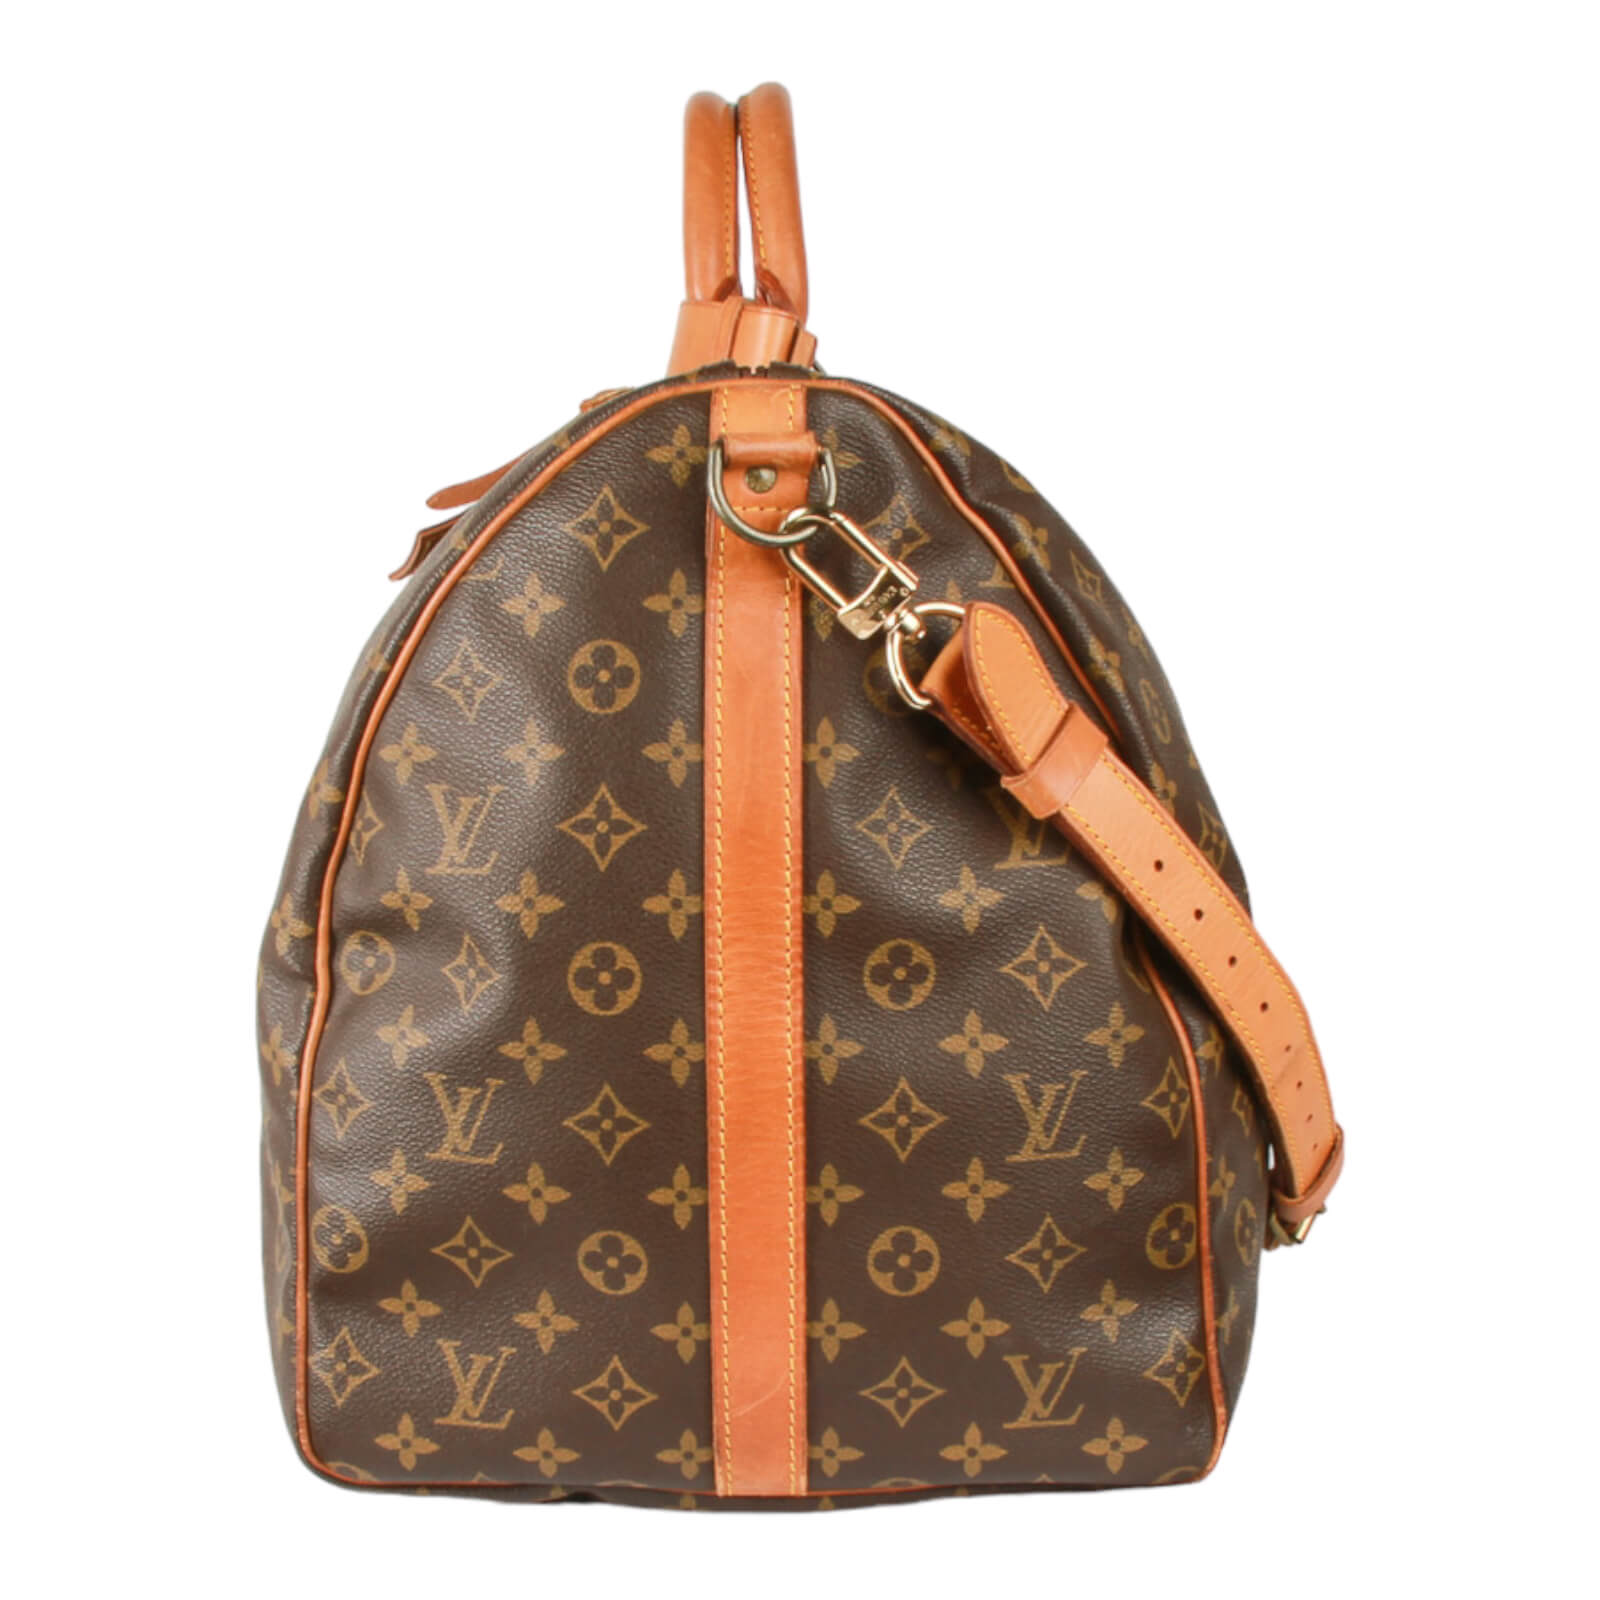 Louis VUITTON TRAVEL BAG in natural leather and Monogra…